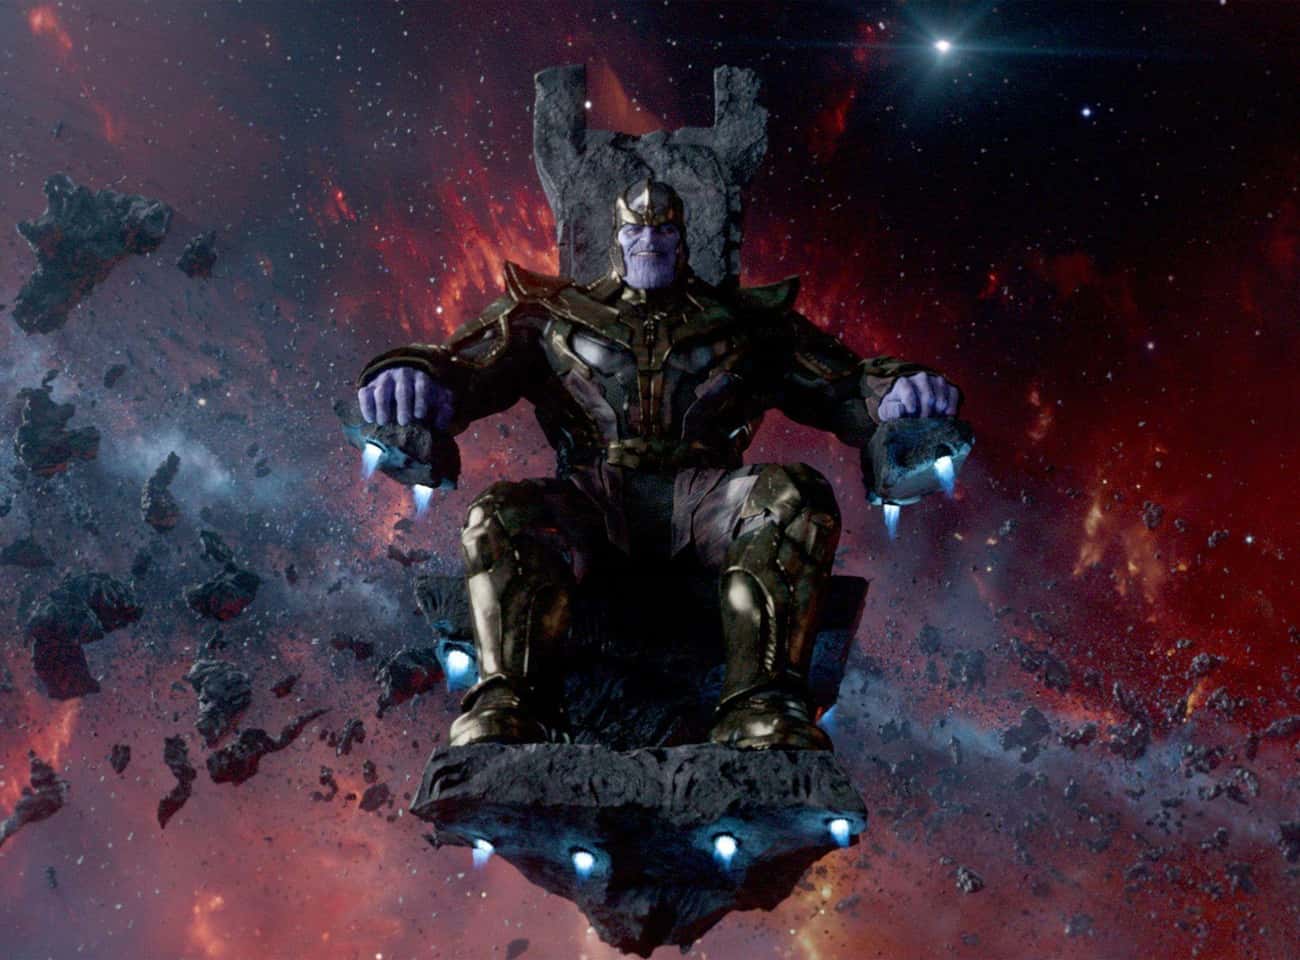 Thanos Doesn’t Want To Rule The Universe - Just Fix It